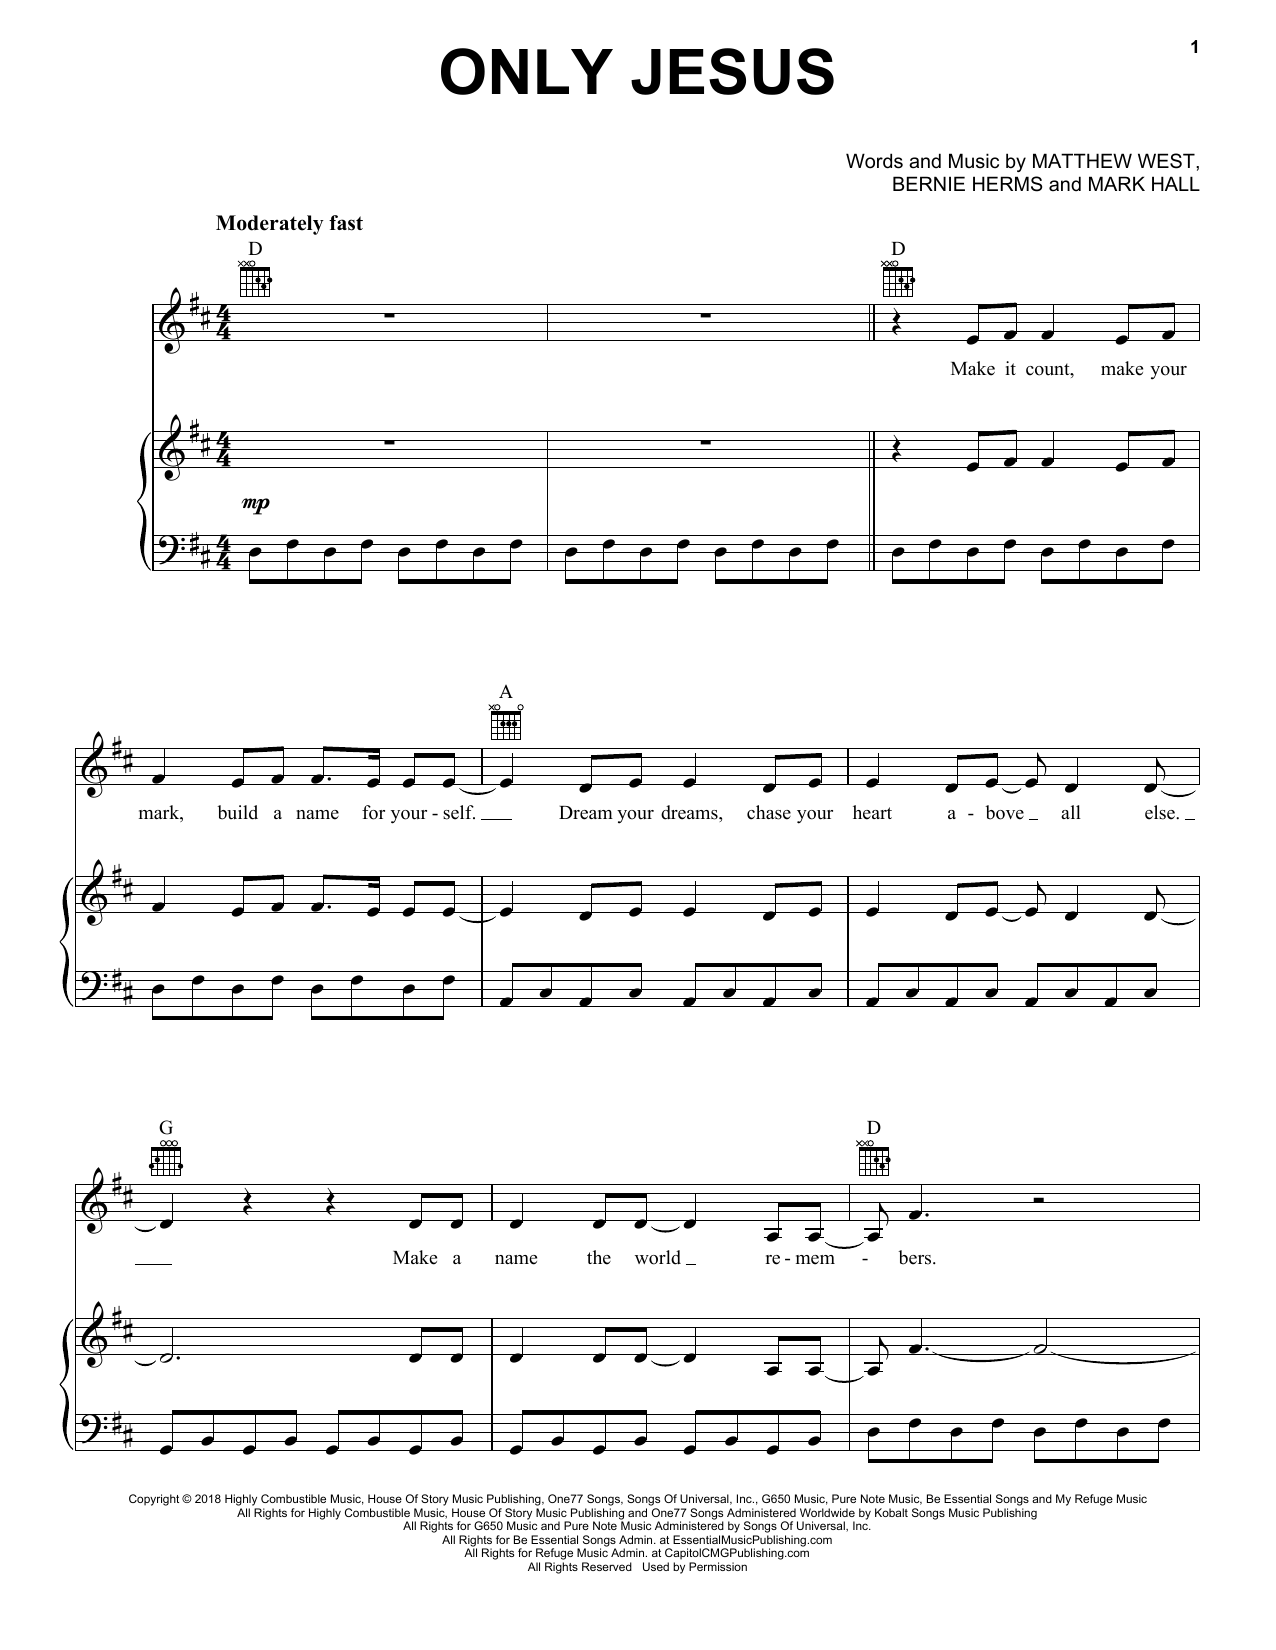 Casting Crowns "Only Jesus" Sheet Music PDF Notes, Chords